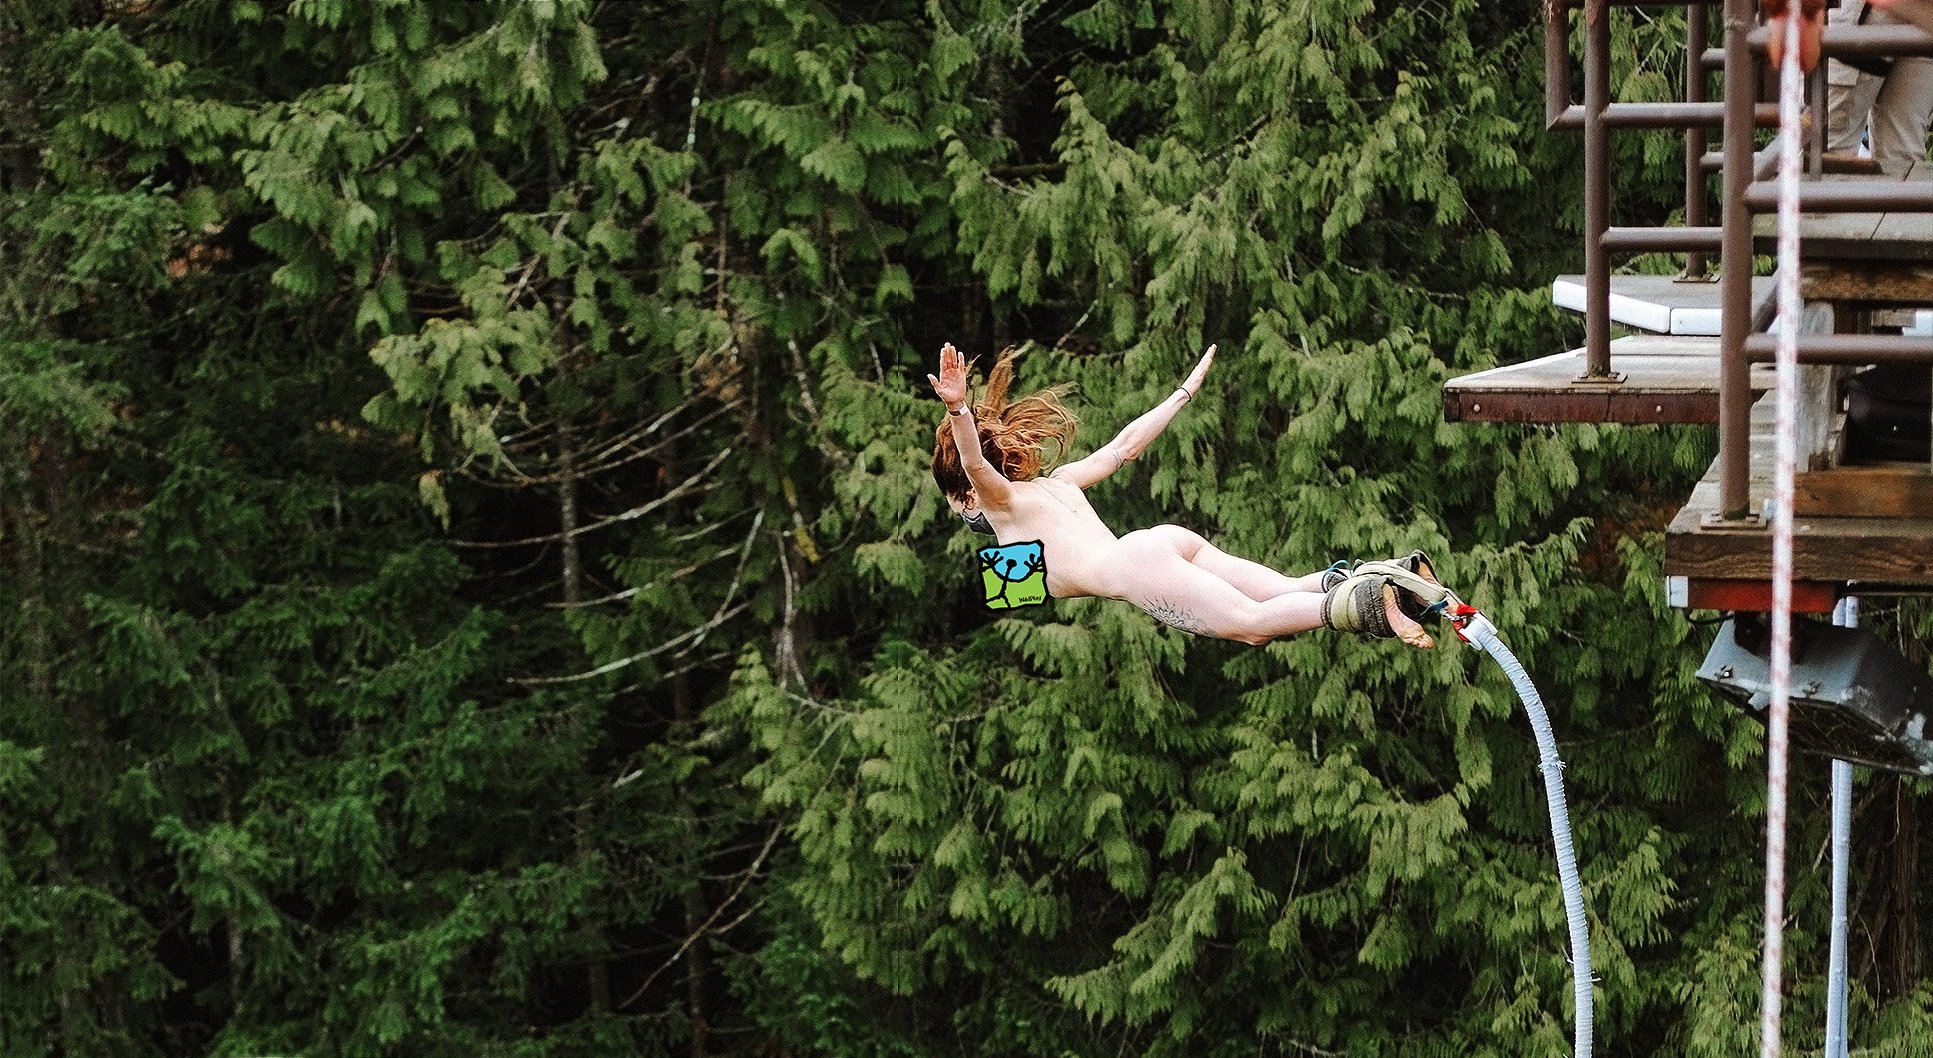 Naked bungee jumping